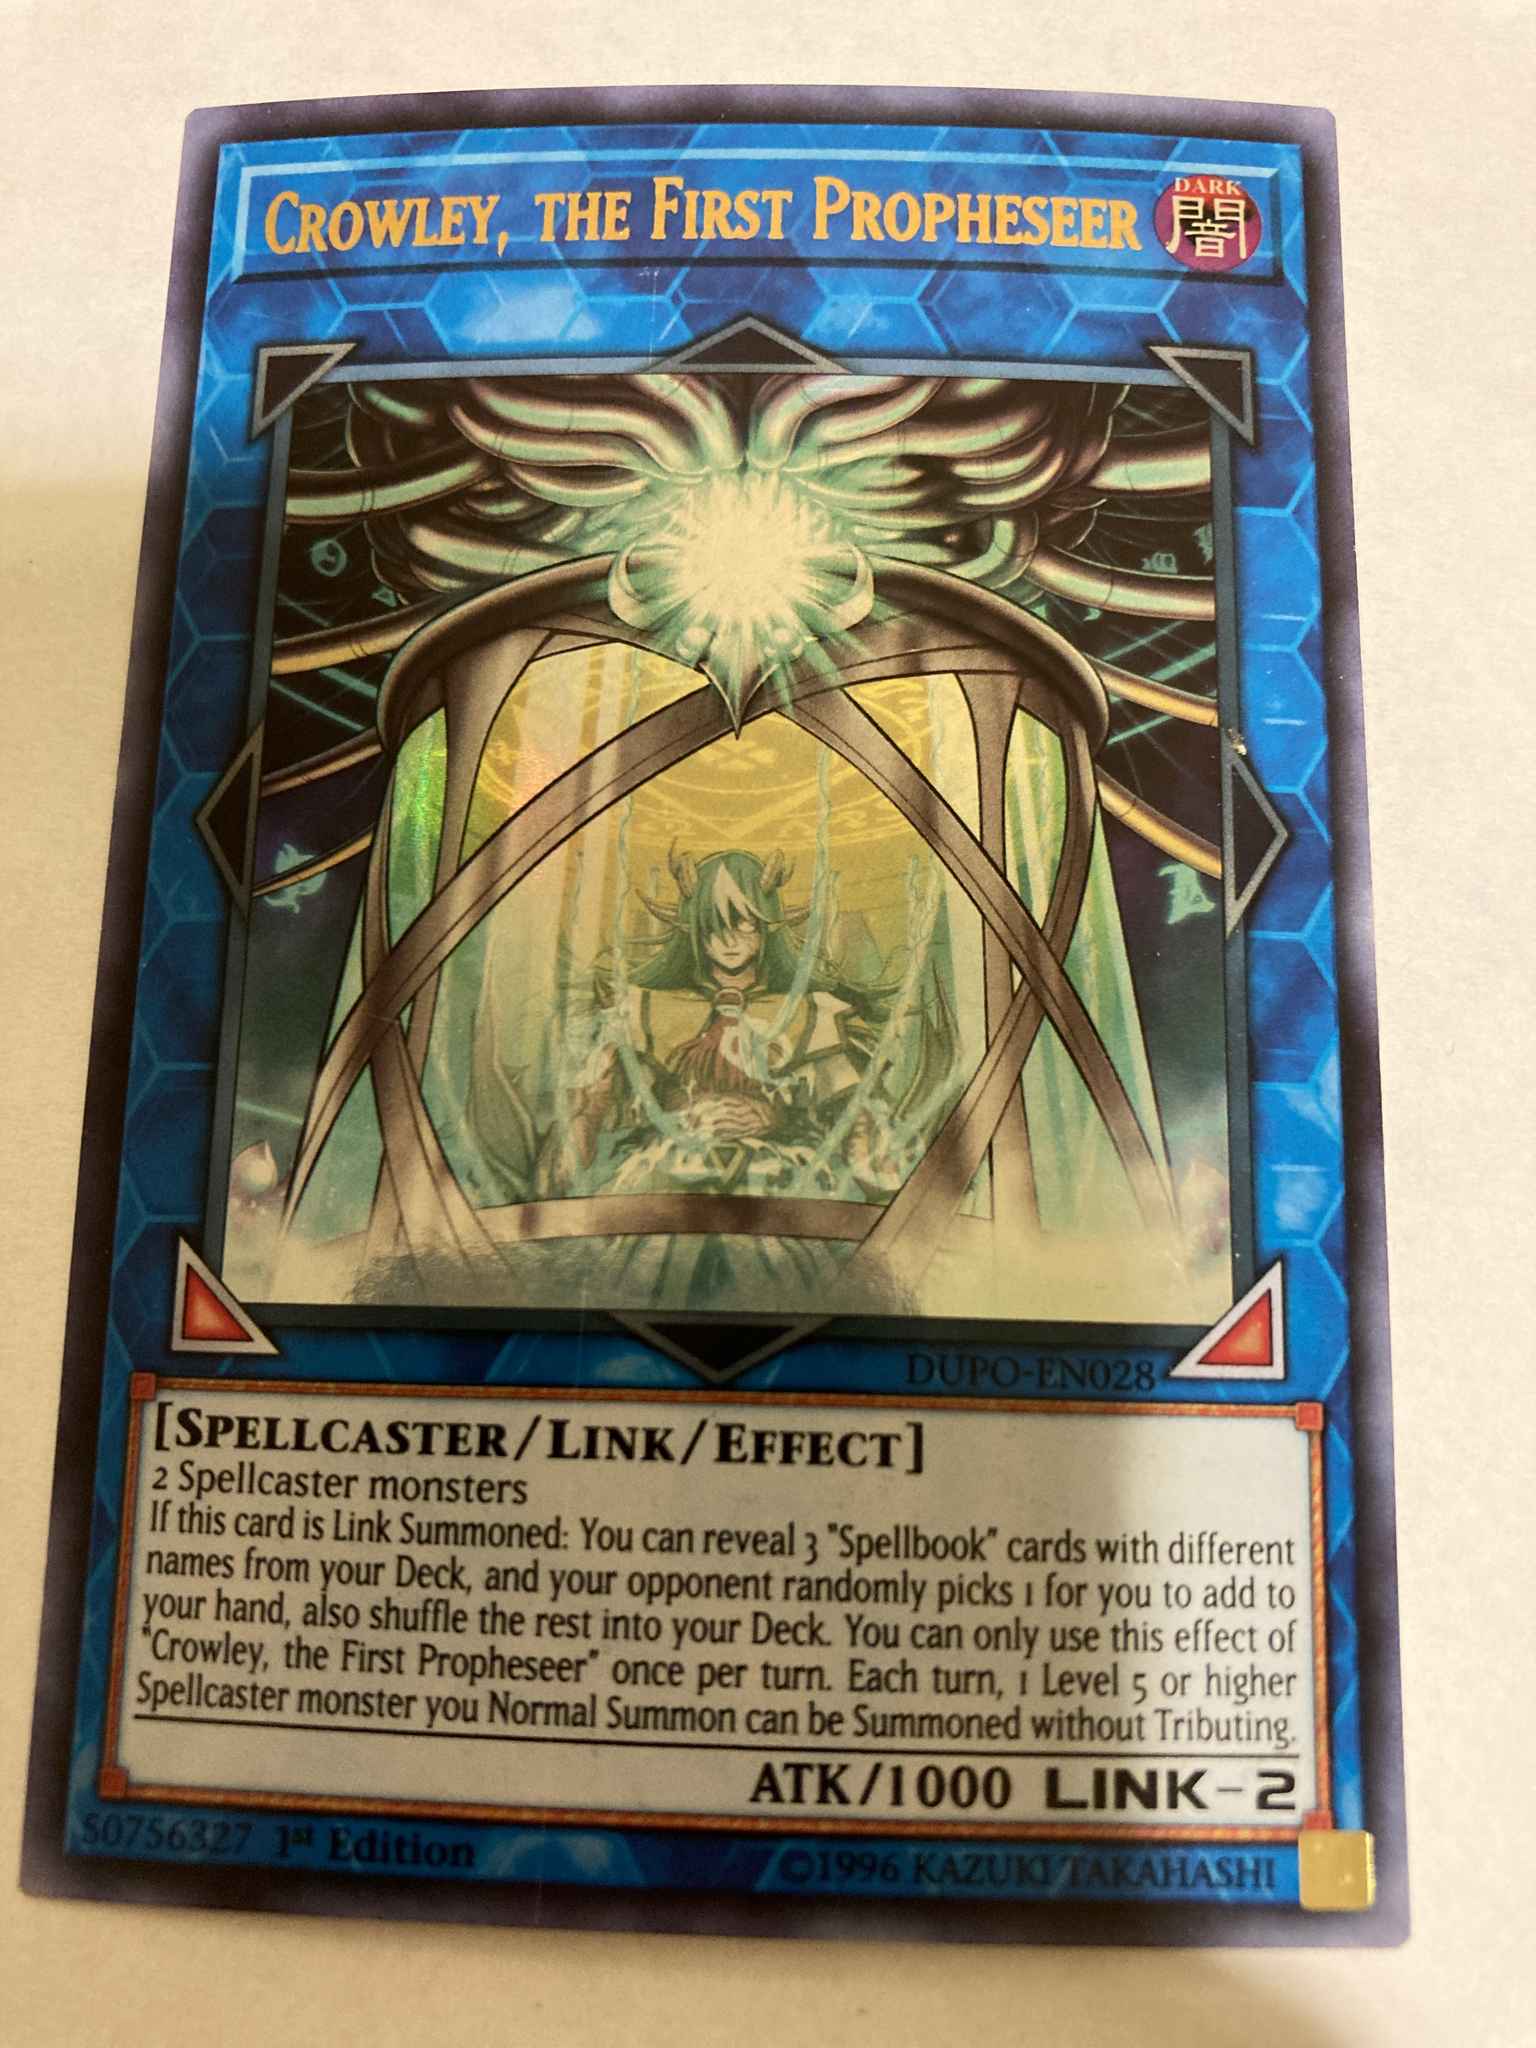 Ultra Rare the First Propheseer DUPO-EN028 1st Edition Crowley